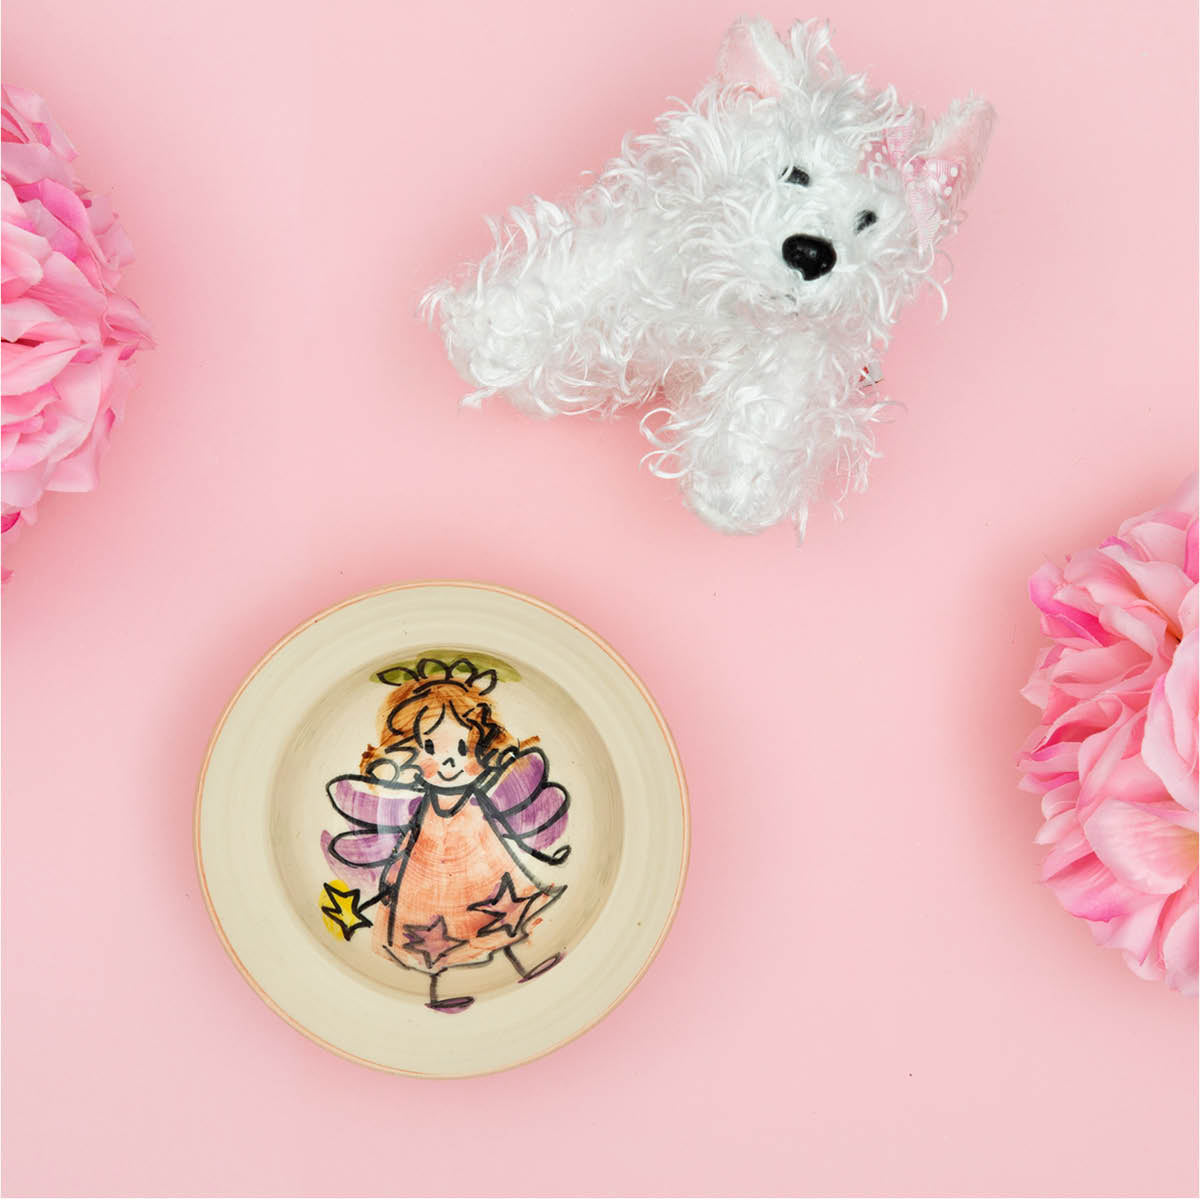 Fairy Plate Gift Set with Puppy Terrier Plush